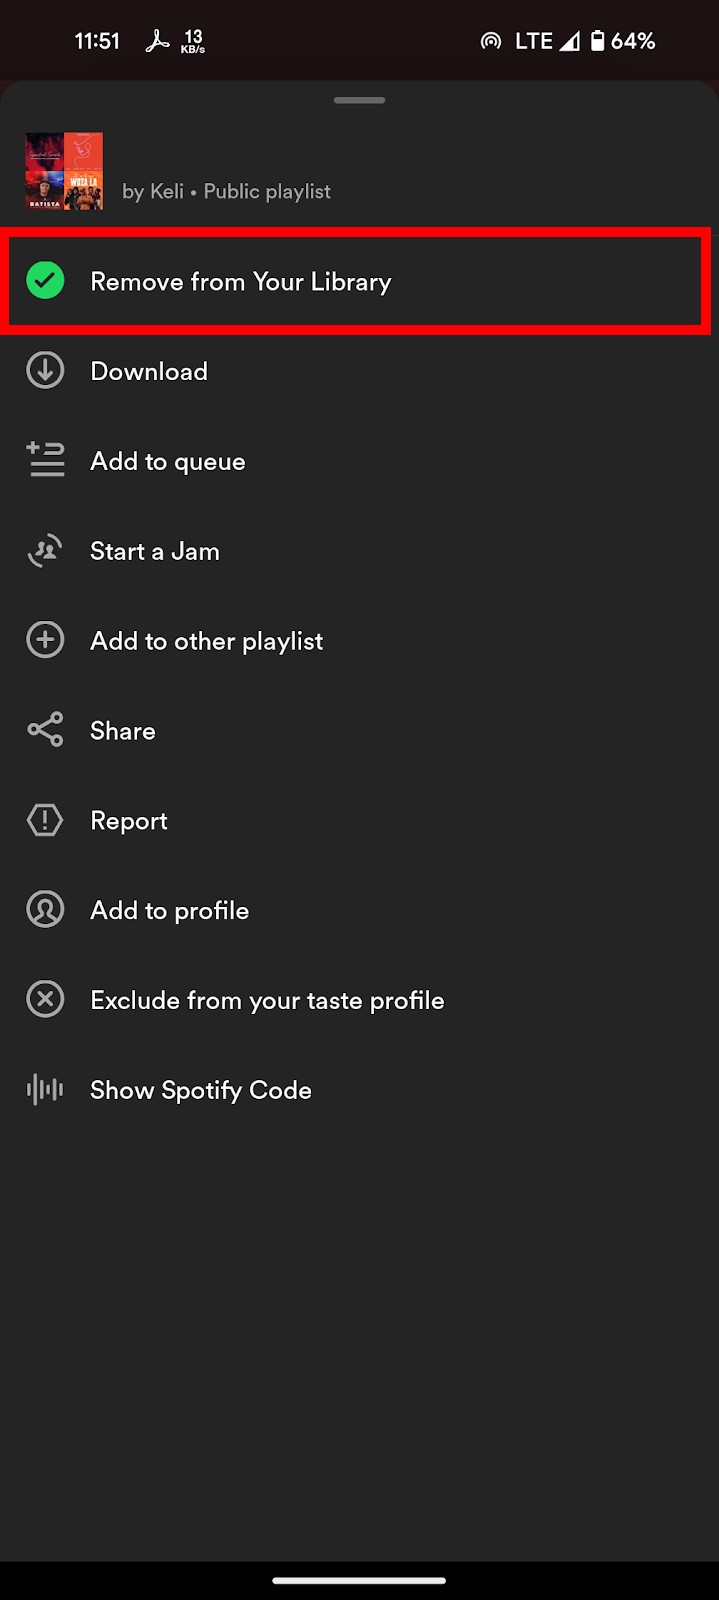 Spotify playlist options with the "Remove from Your Library" option highlighted